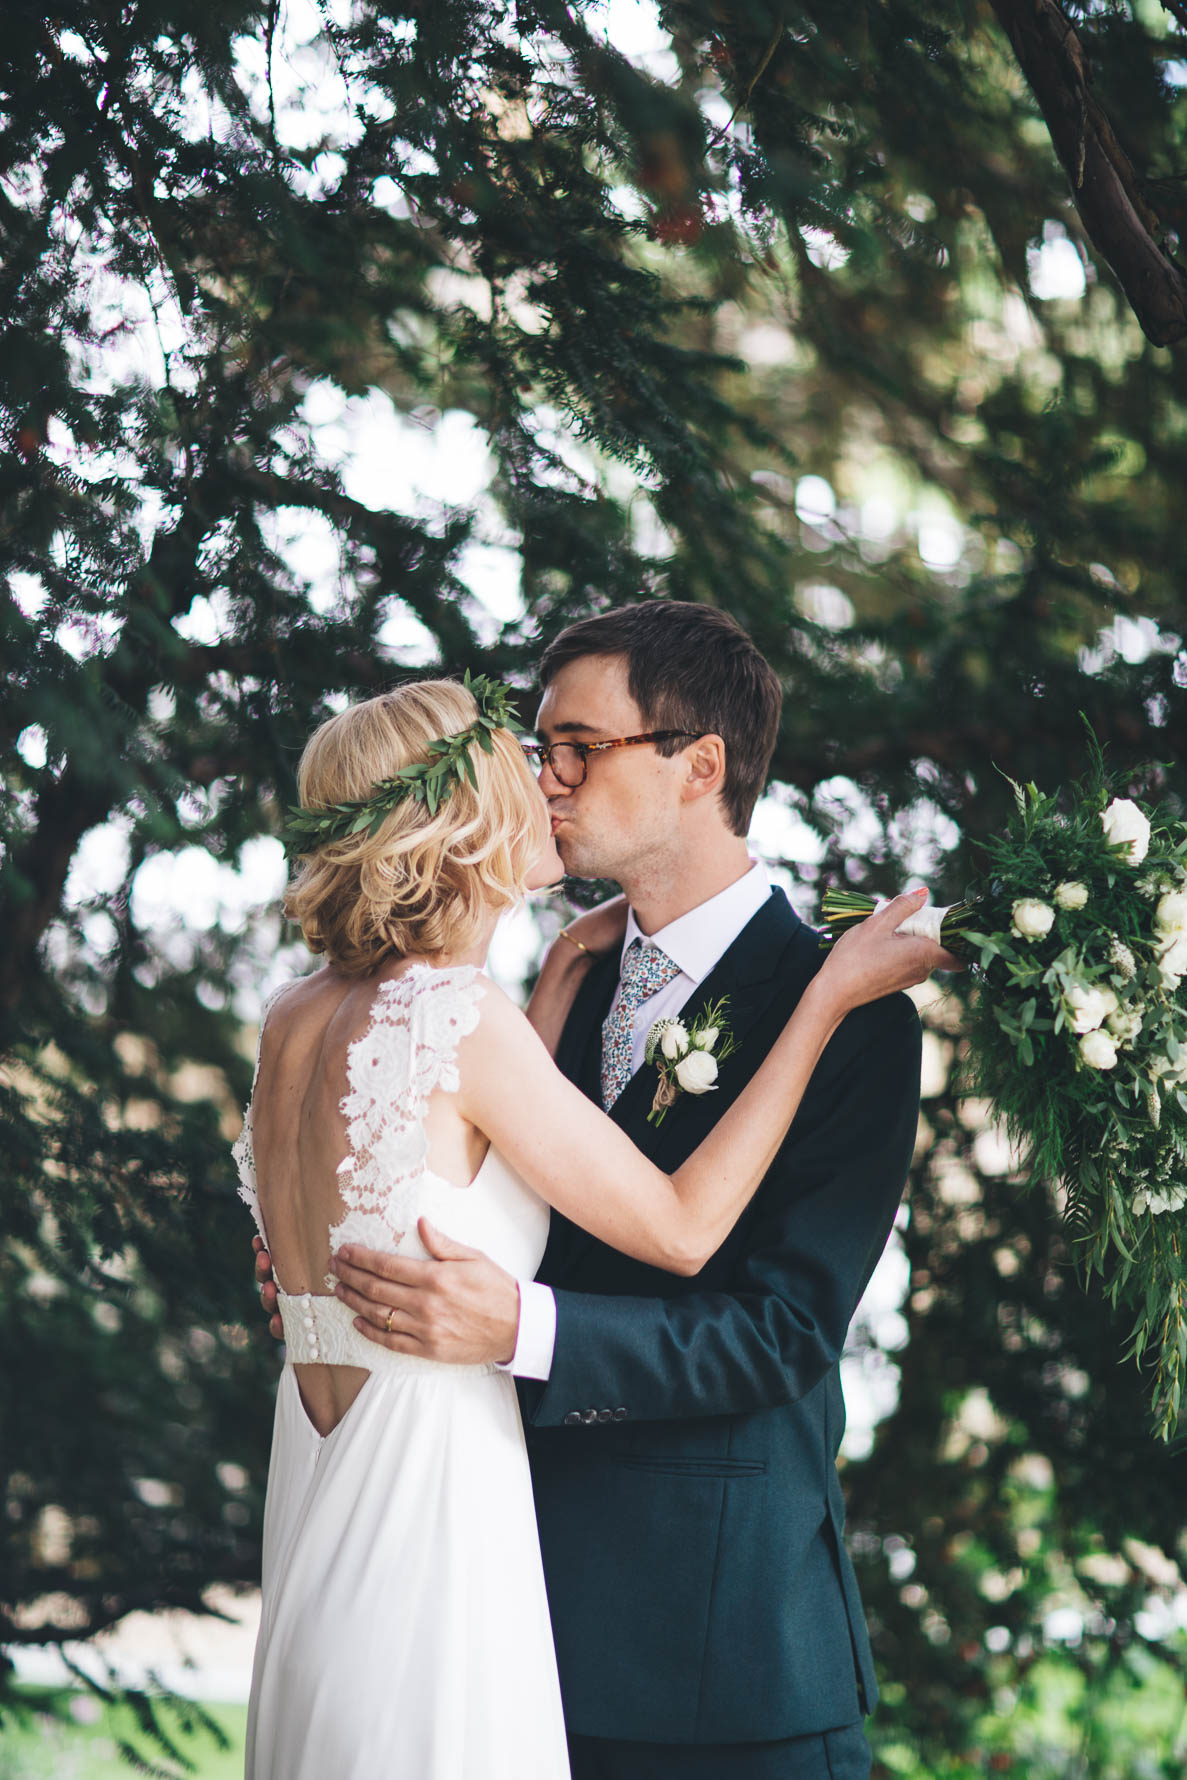 Bride and groom with their arms around each other stood sharing a kiss in a wooded area